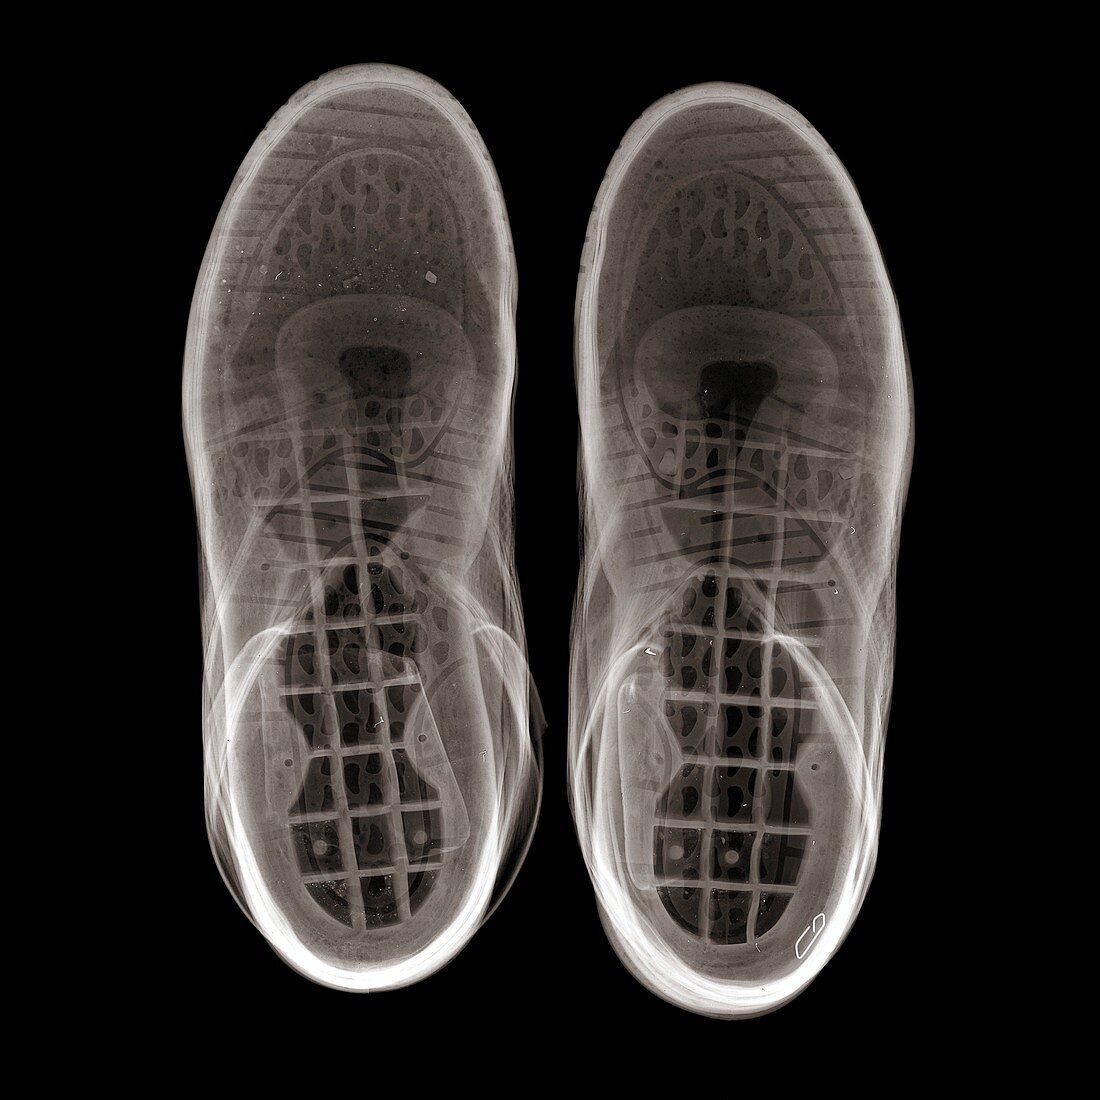 Trainers from above, X-ray